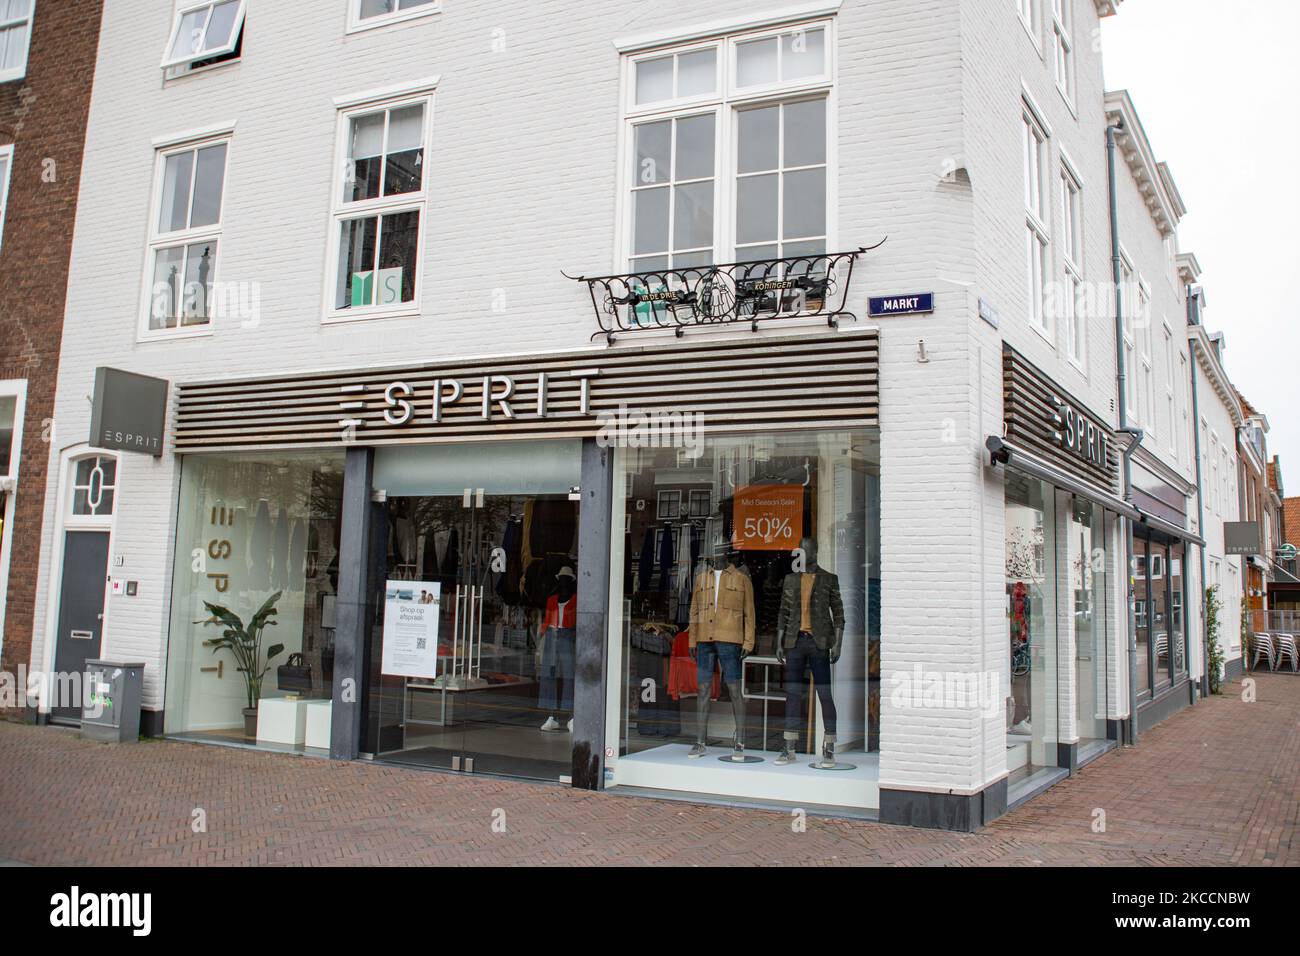 Esprit shop with the logo sign on the facade of the building and a billboard as seen closed in the Dutch city Middelburg. Esprit Holdings Limited is a publicly owned manufacturer of clothing, footwear accessories, jewelry and housewares under the Esprit label with 429 retail stores worldwide. Due to the Covid-19 Coronavirus pandemic and the lockdown measures applied, shopping to non-essential shops is allowed only with an appointment. Middelburg, Netherlands on Apri 11, 2021 (Photo by Nicolas Economou/NurPhoto) Stock Photo